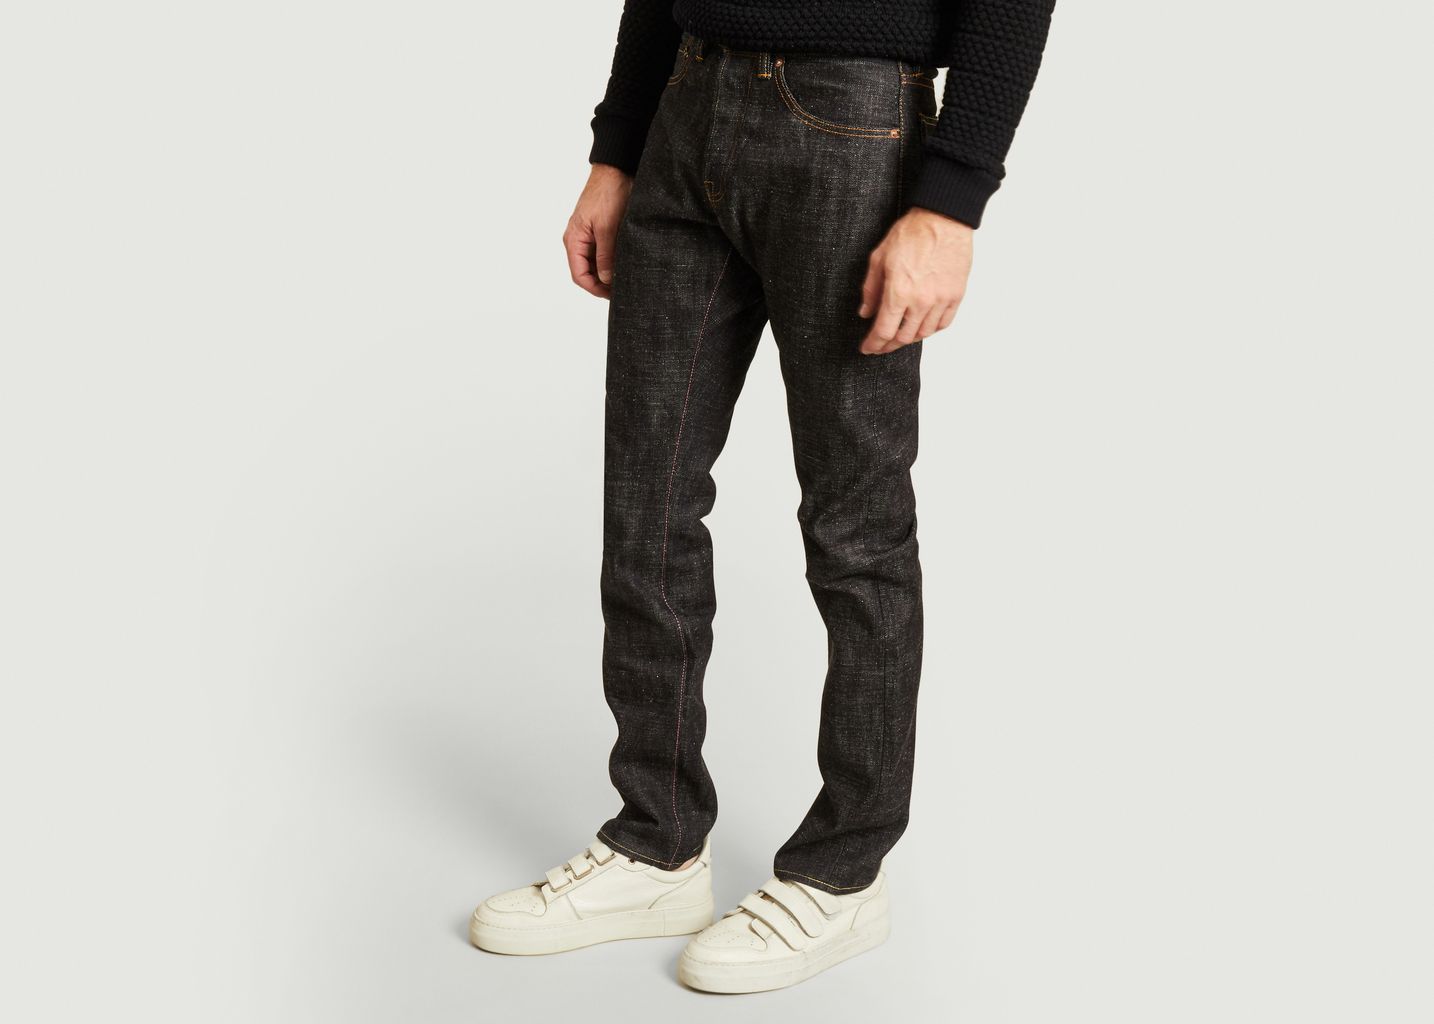 Jeans 0605 16oz Natural Tapered - Momotaro Jeans